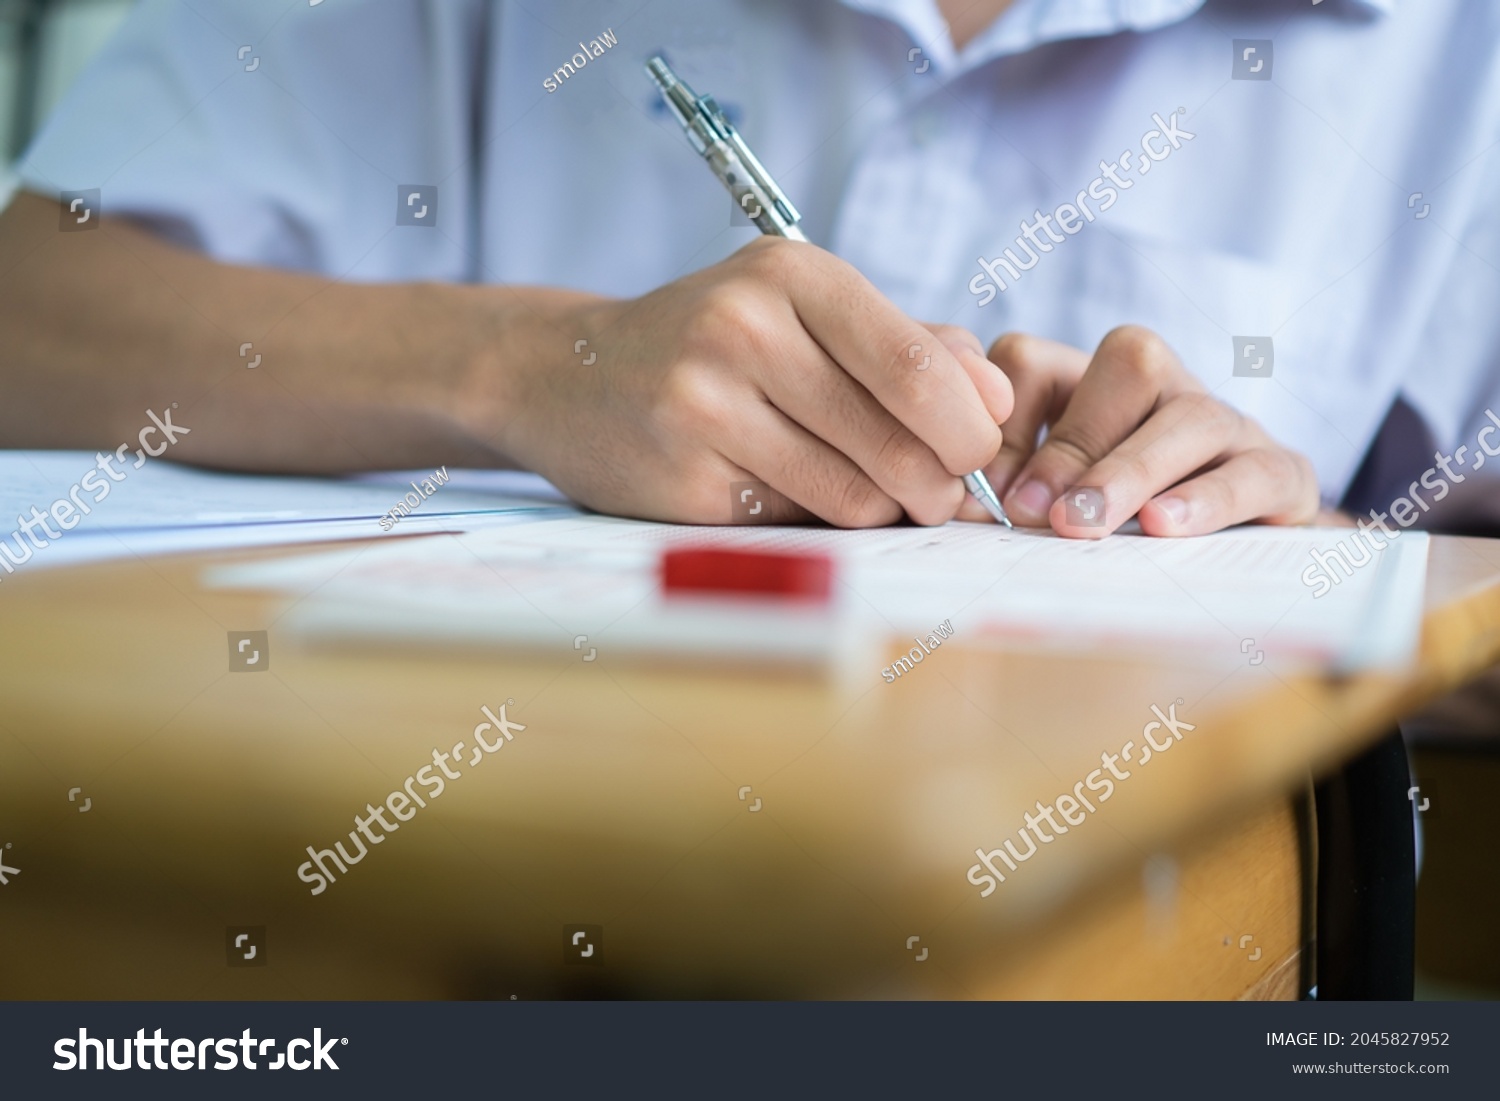 Writing Test Exam Asian Students Concentrate Stock Photo 2045827952